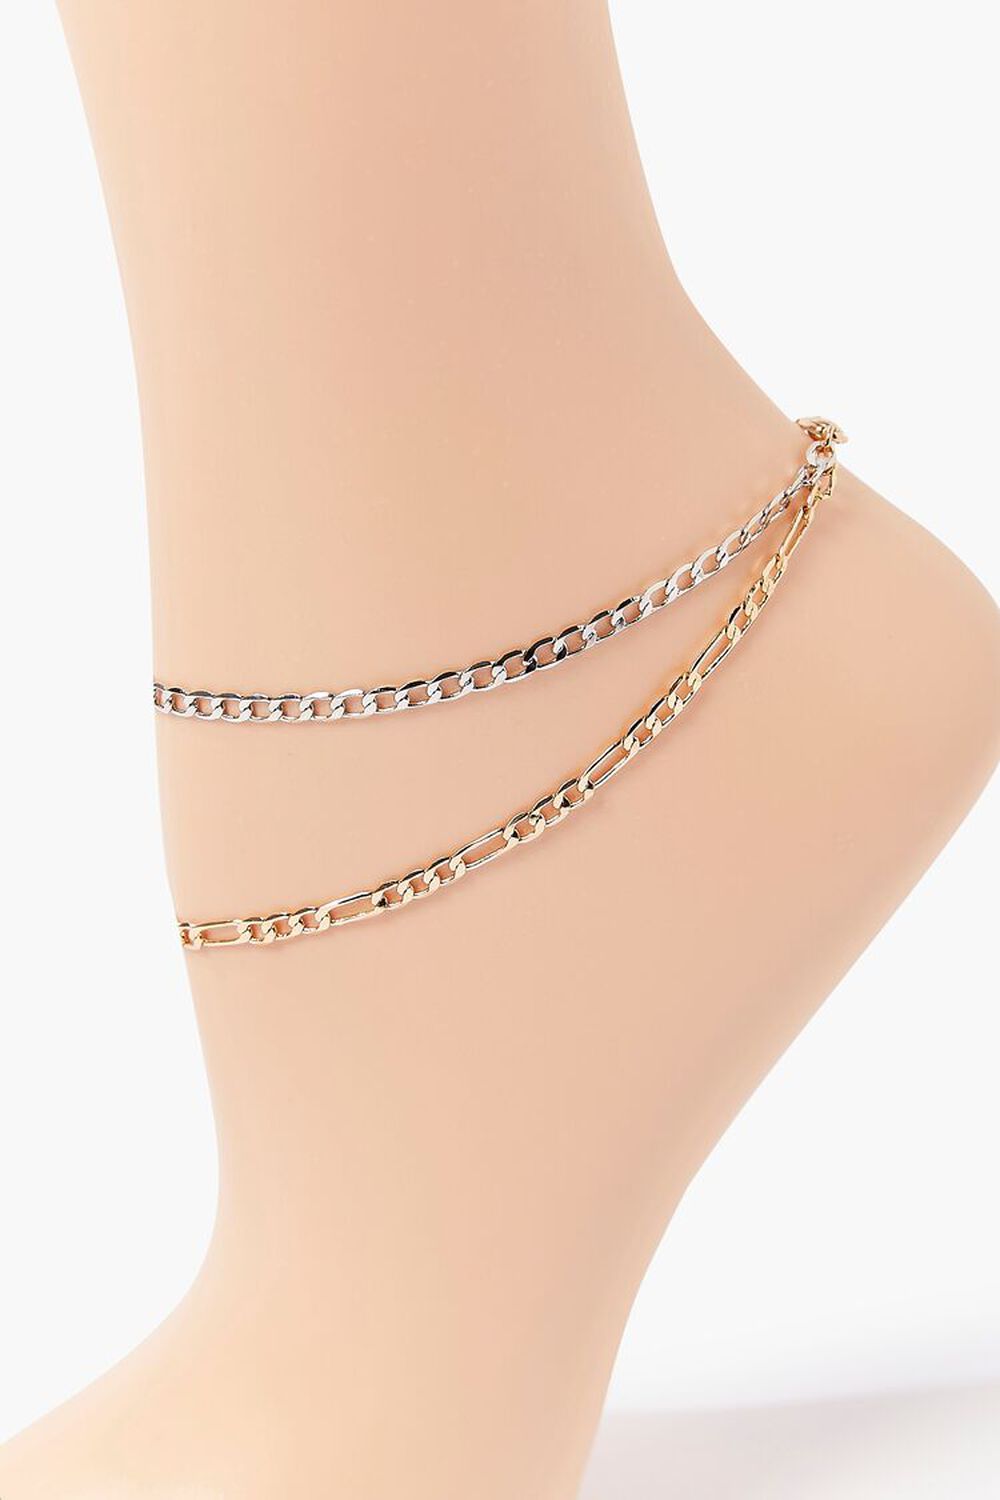 GOLD/SILVER Chain Anklet Set, image 1